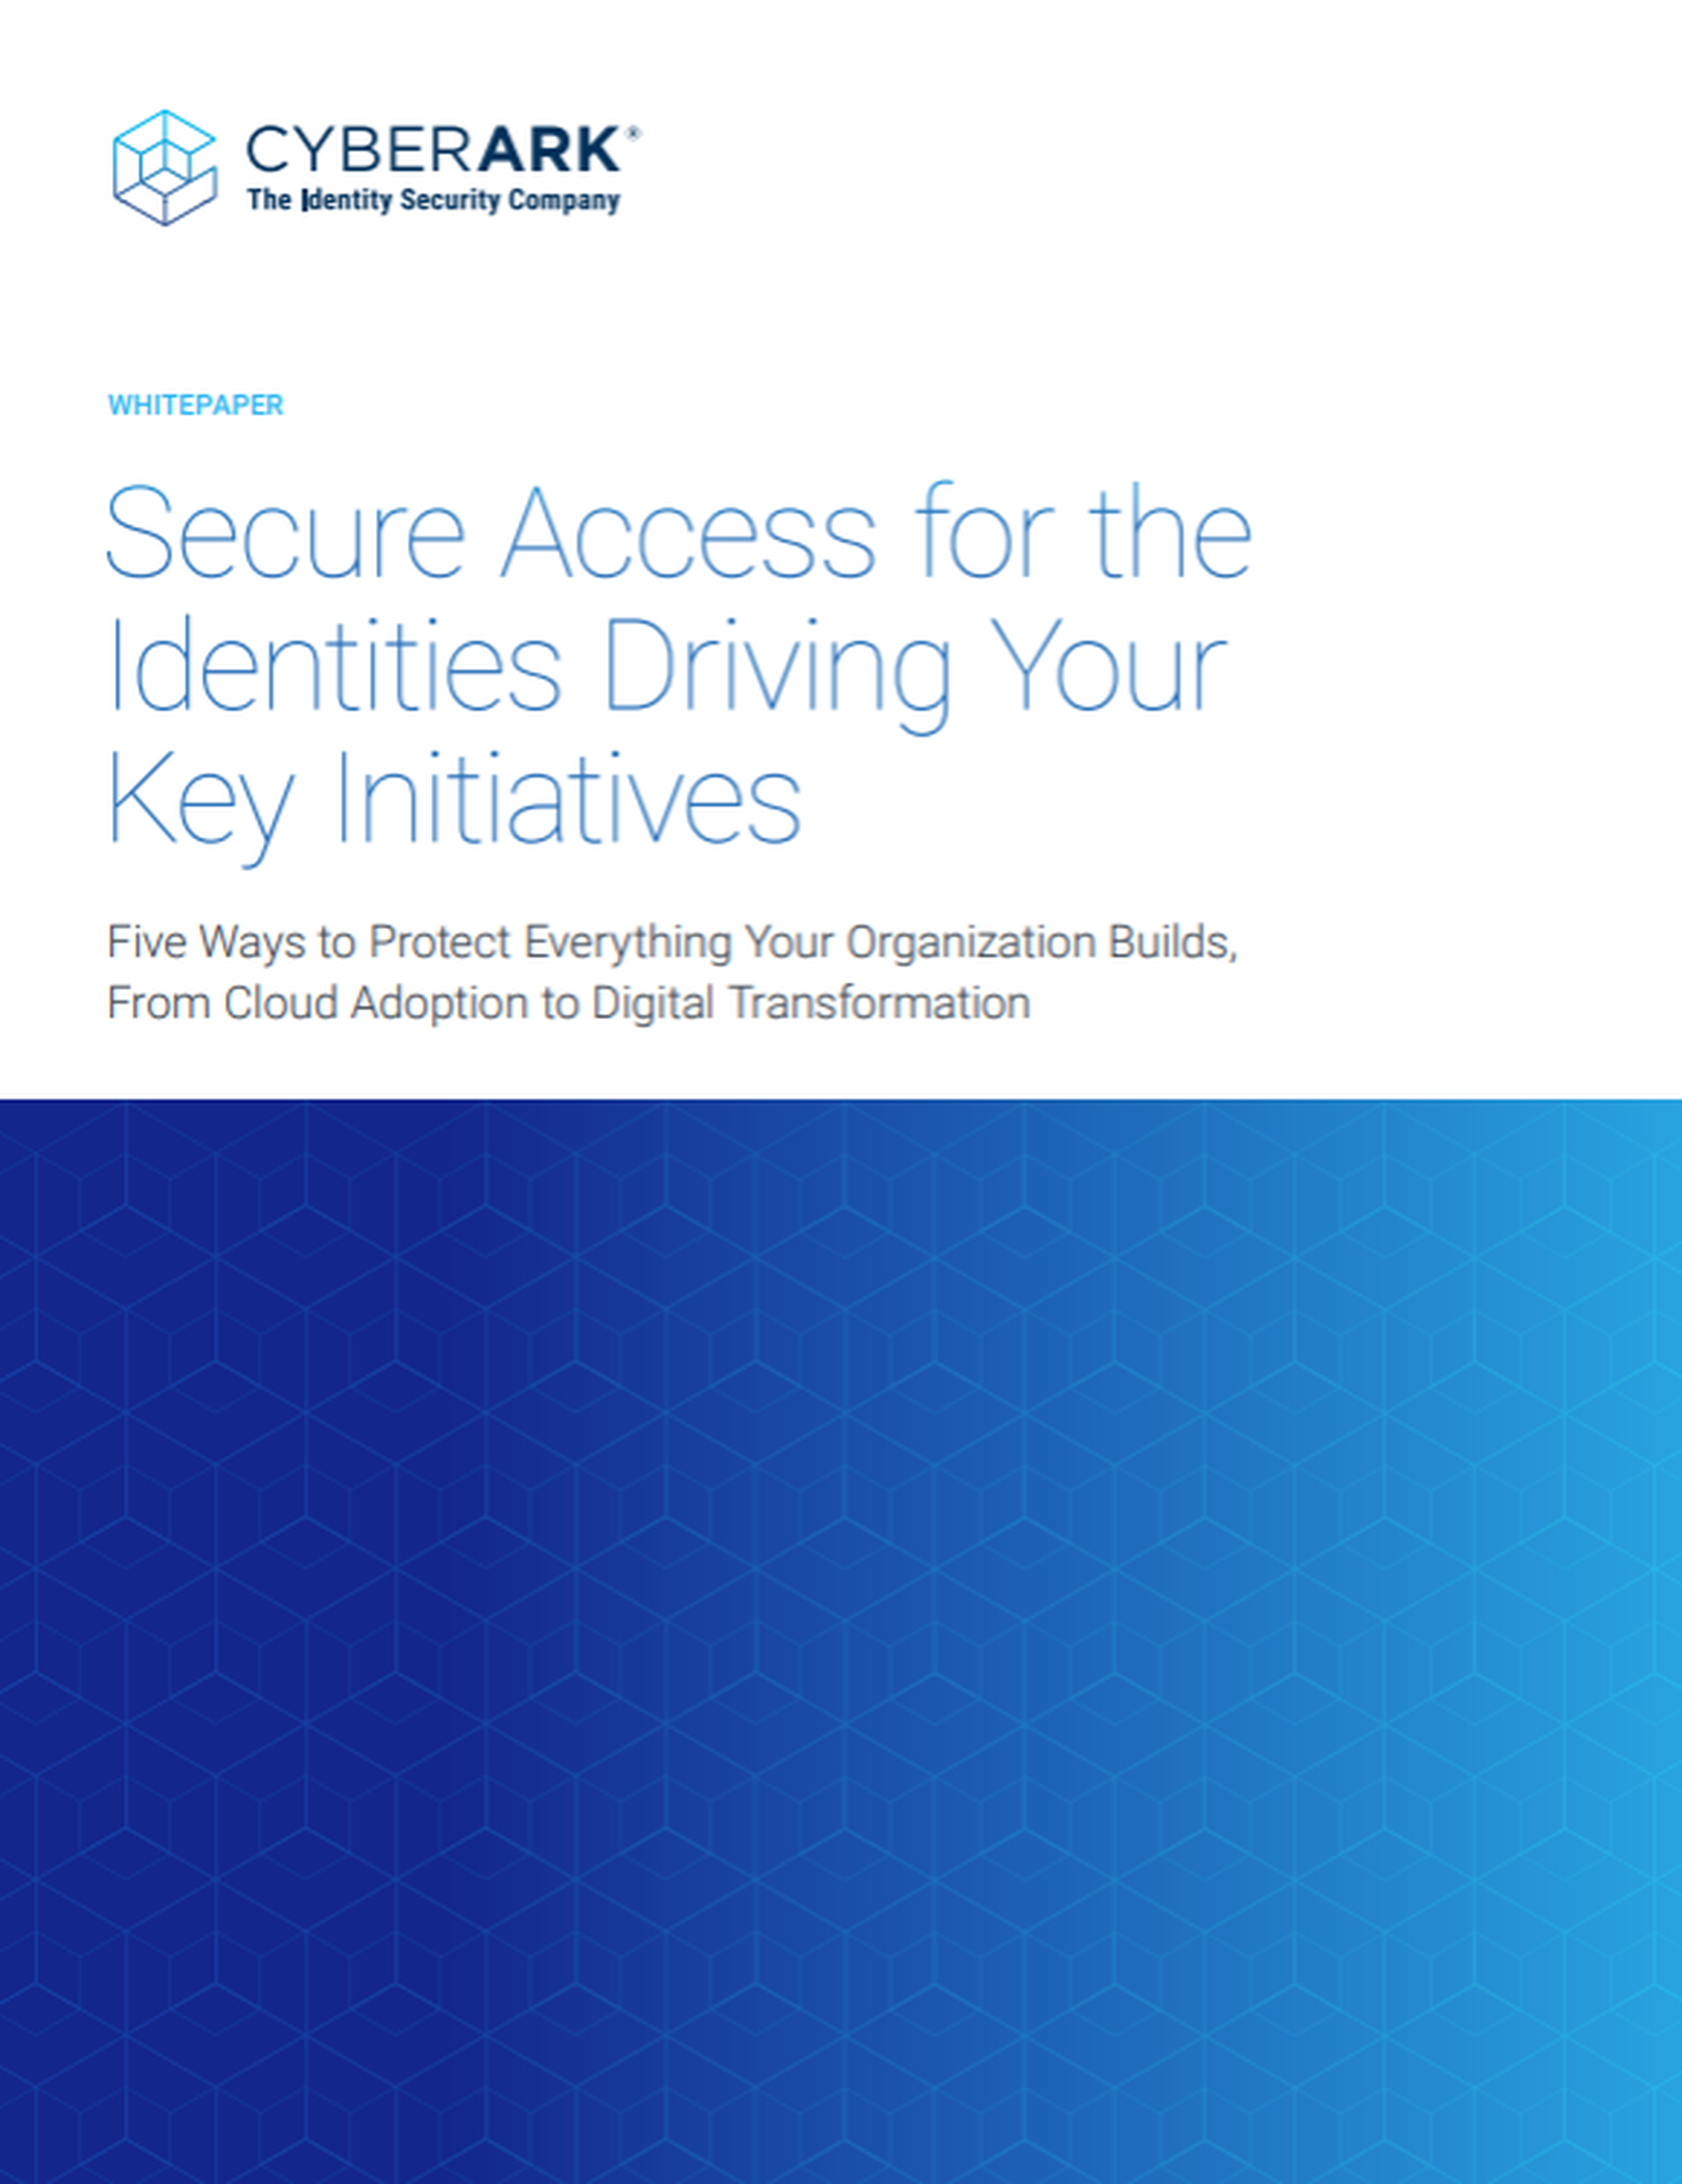 Best Practices to Secure the Identities Driving Key Initiatives